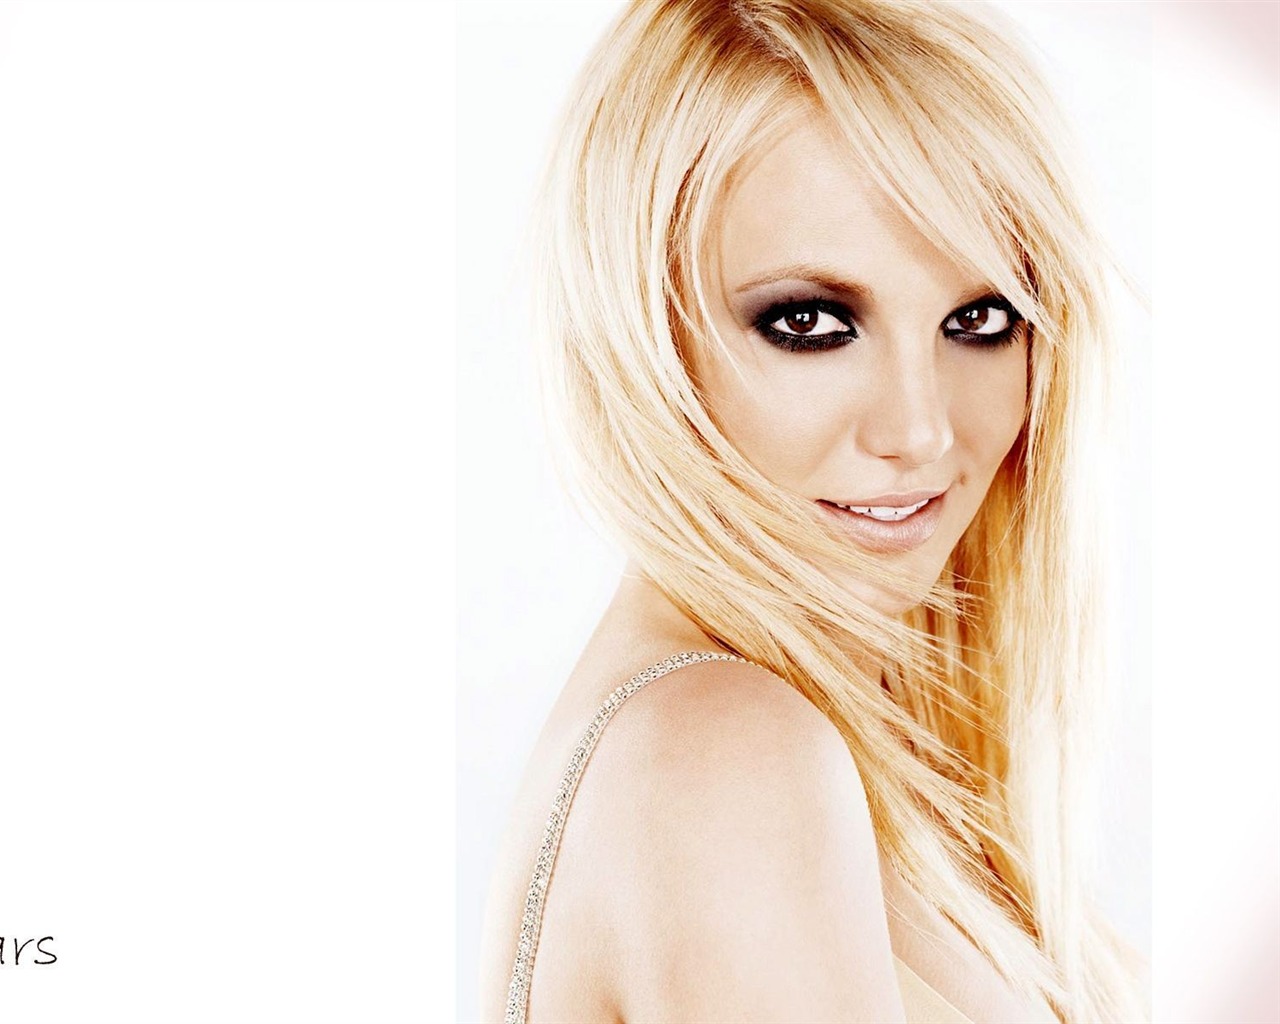 Britney Spears #016 - 1280x1024 Wallpapers Pictures Photos Images